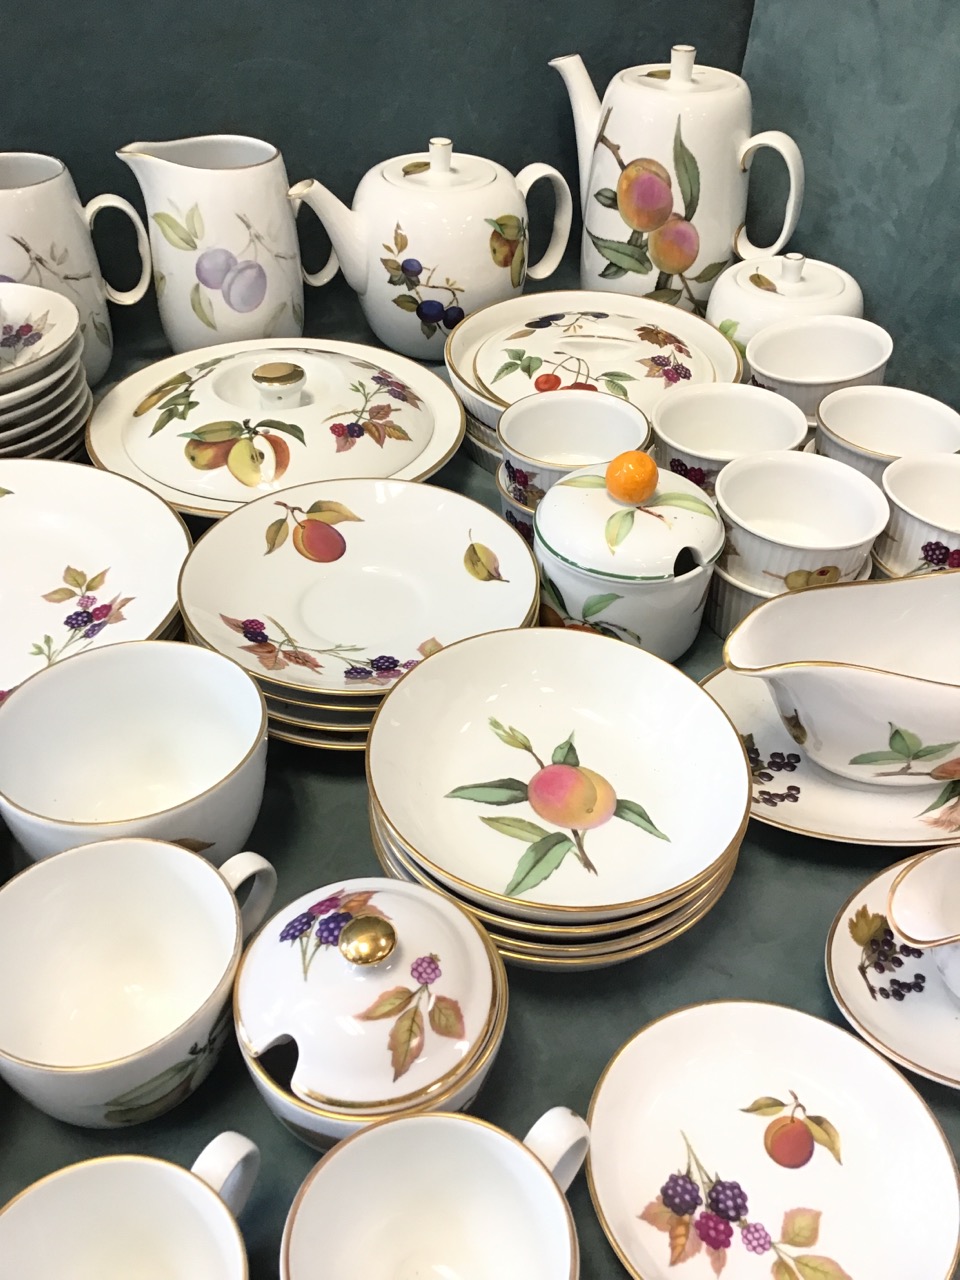 An extensive Royal Worcester service in the Evesham pattern - cups, saucers, teaplates, bowls, - Image 2 of 3